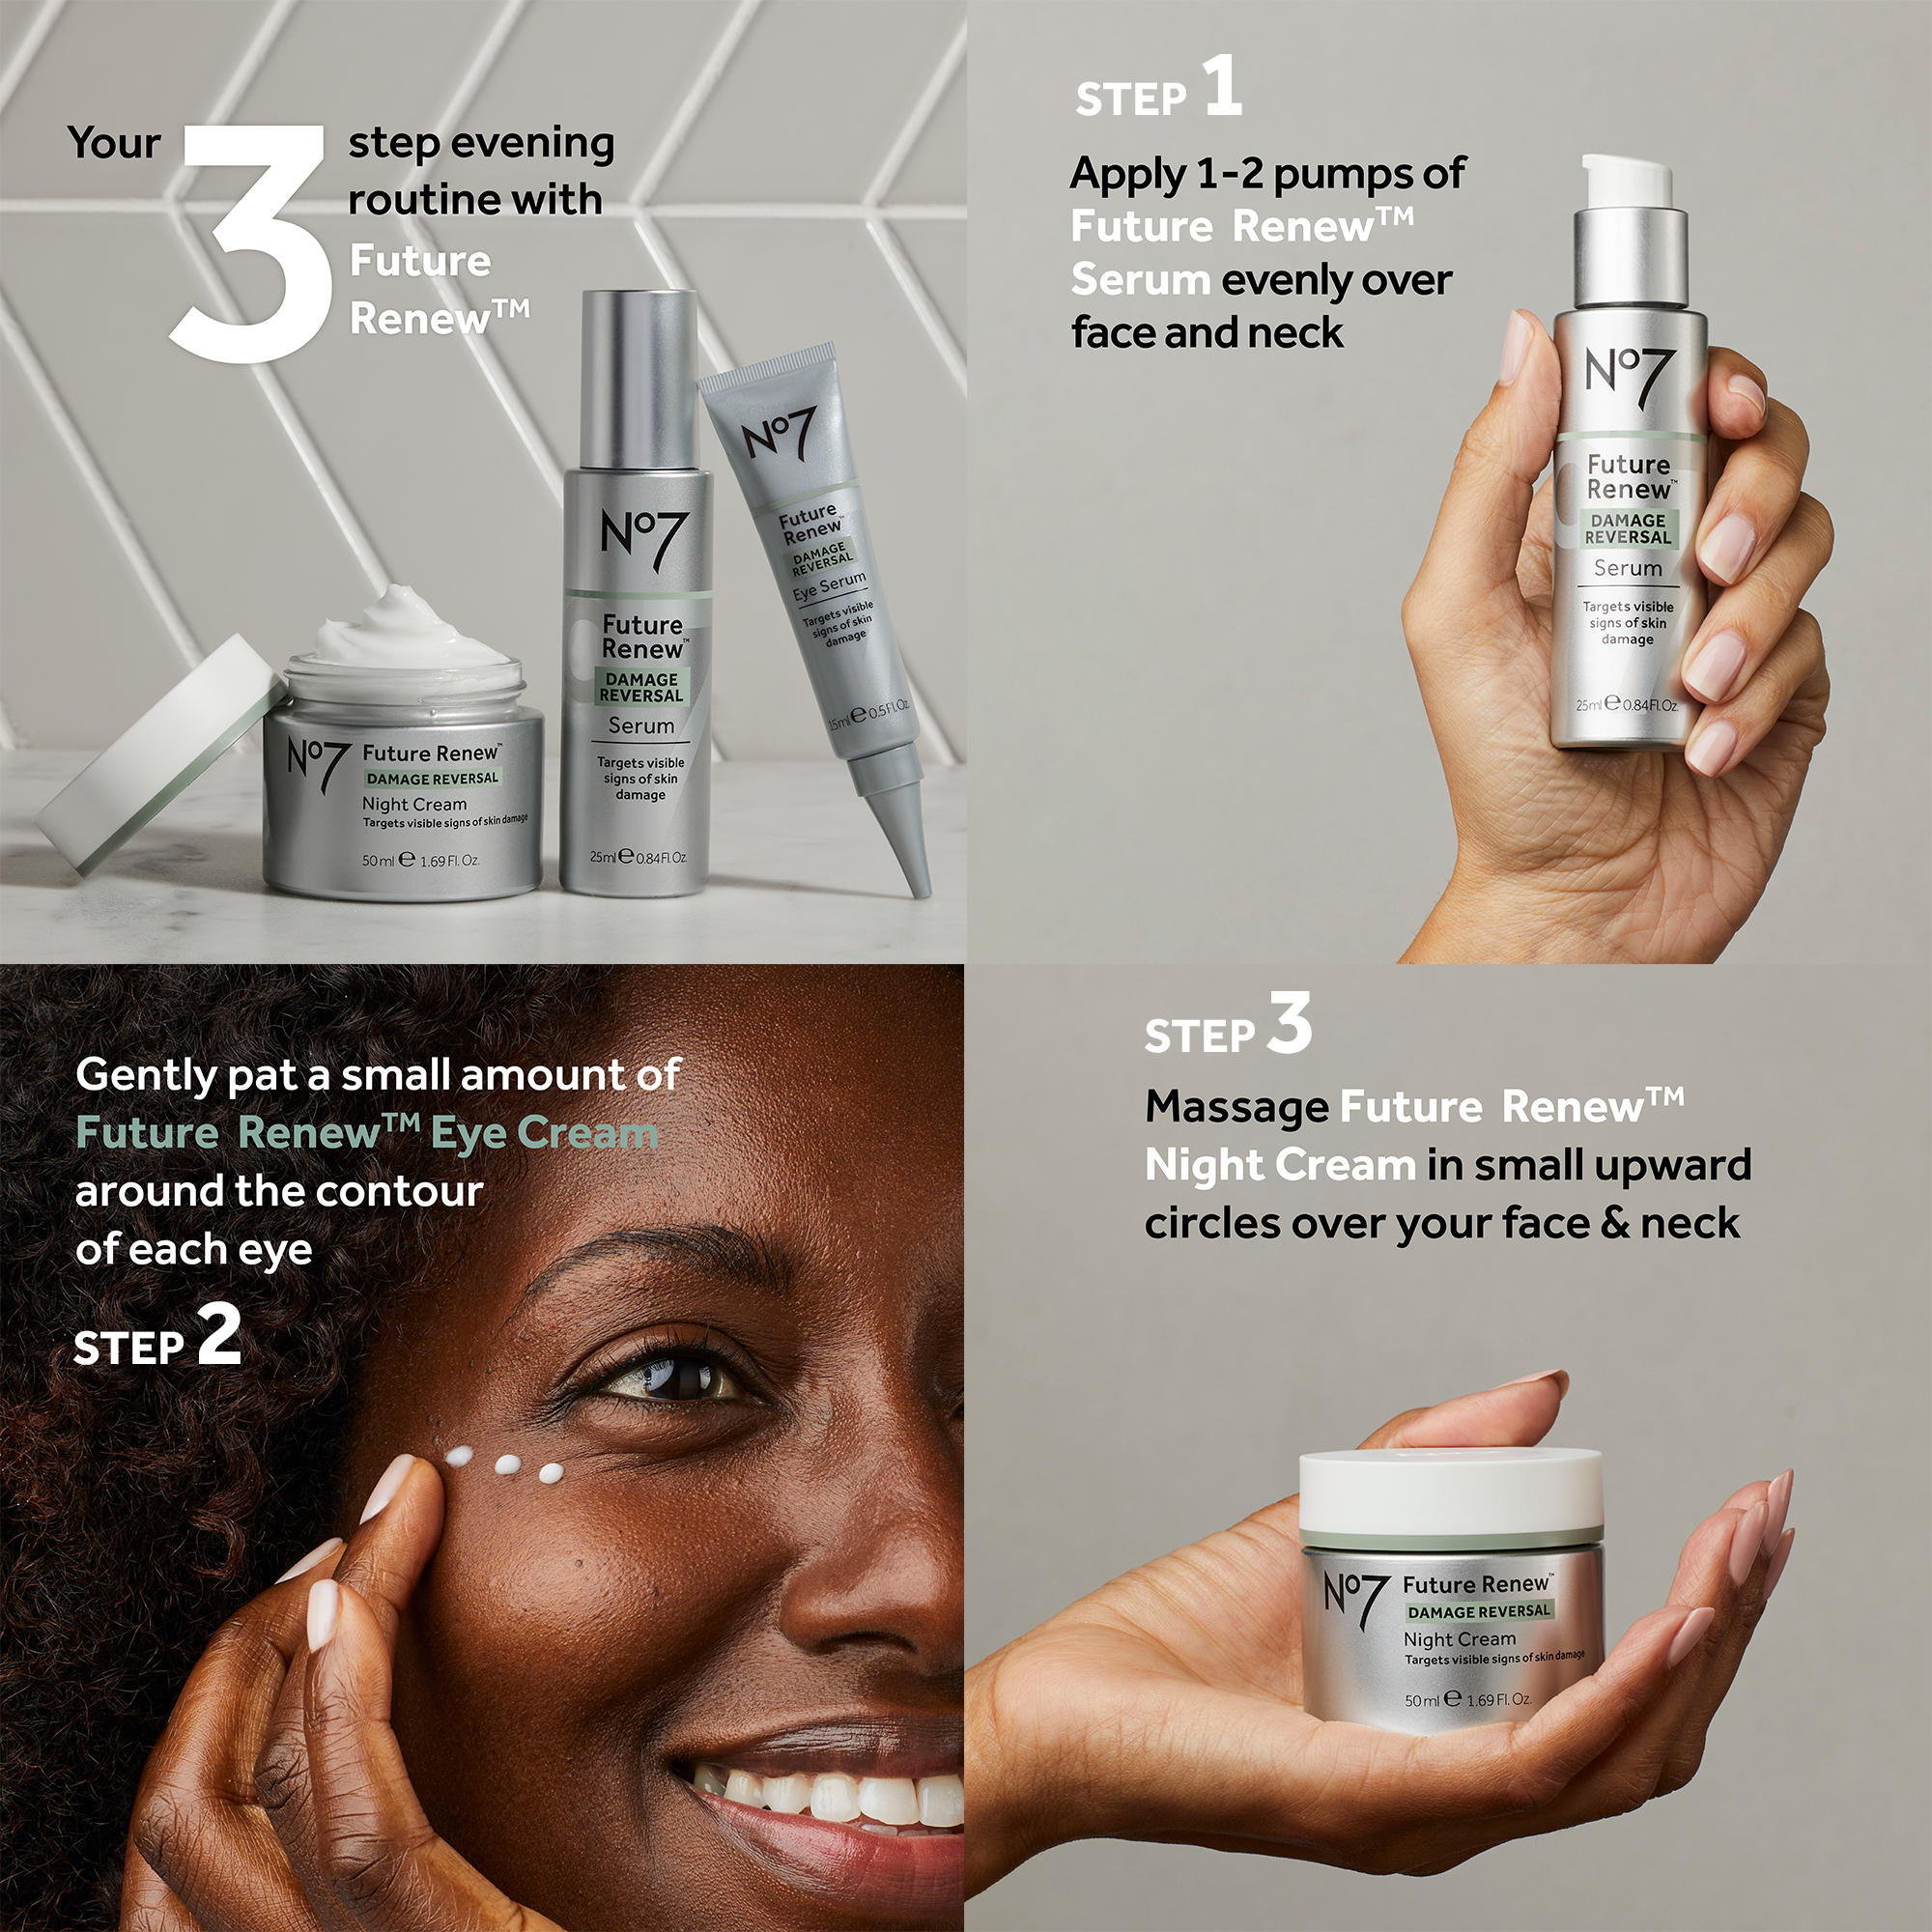  your 3 step evening routine with future renew. Step 1, apply 1-2 pumps of future renew serum evenly over face and neck. Step 2, gently pat a small amount of future renew eve cream around the contour of each eye. Step 3 massage future renew night cream in small upward circles over your face and neck.